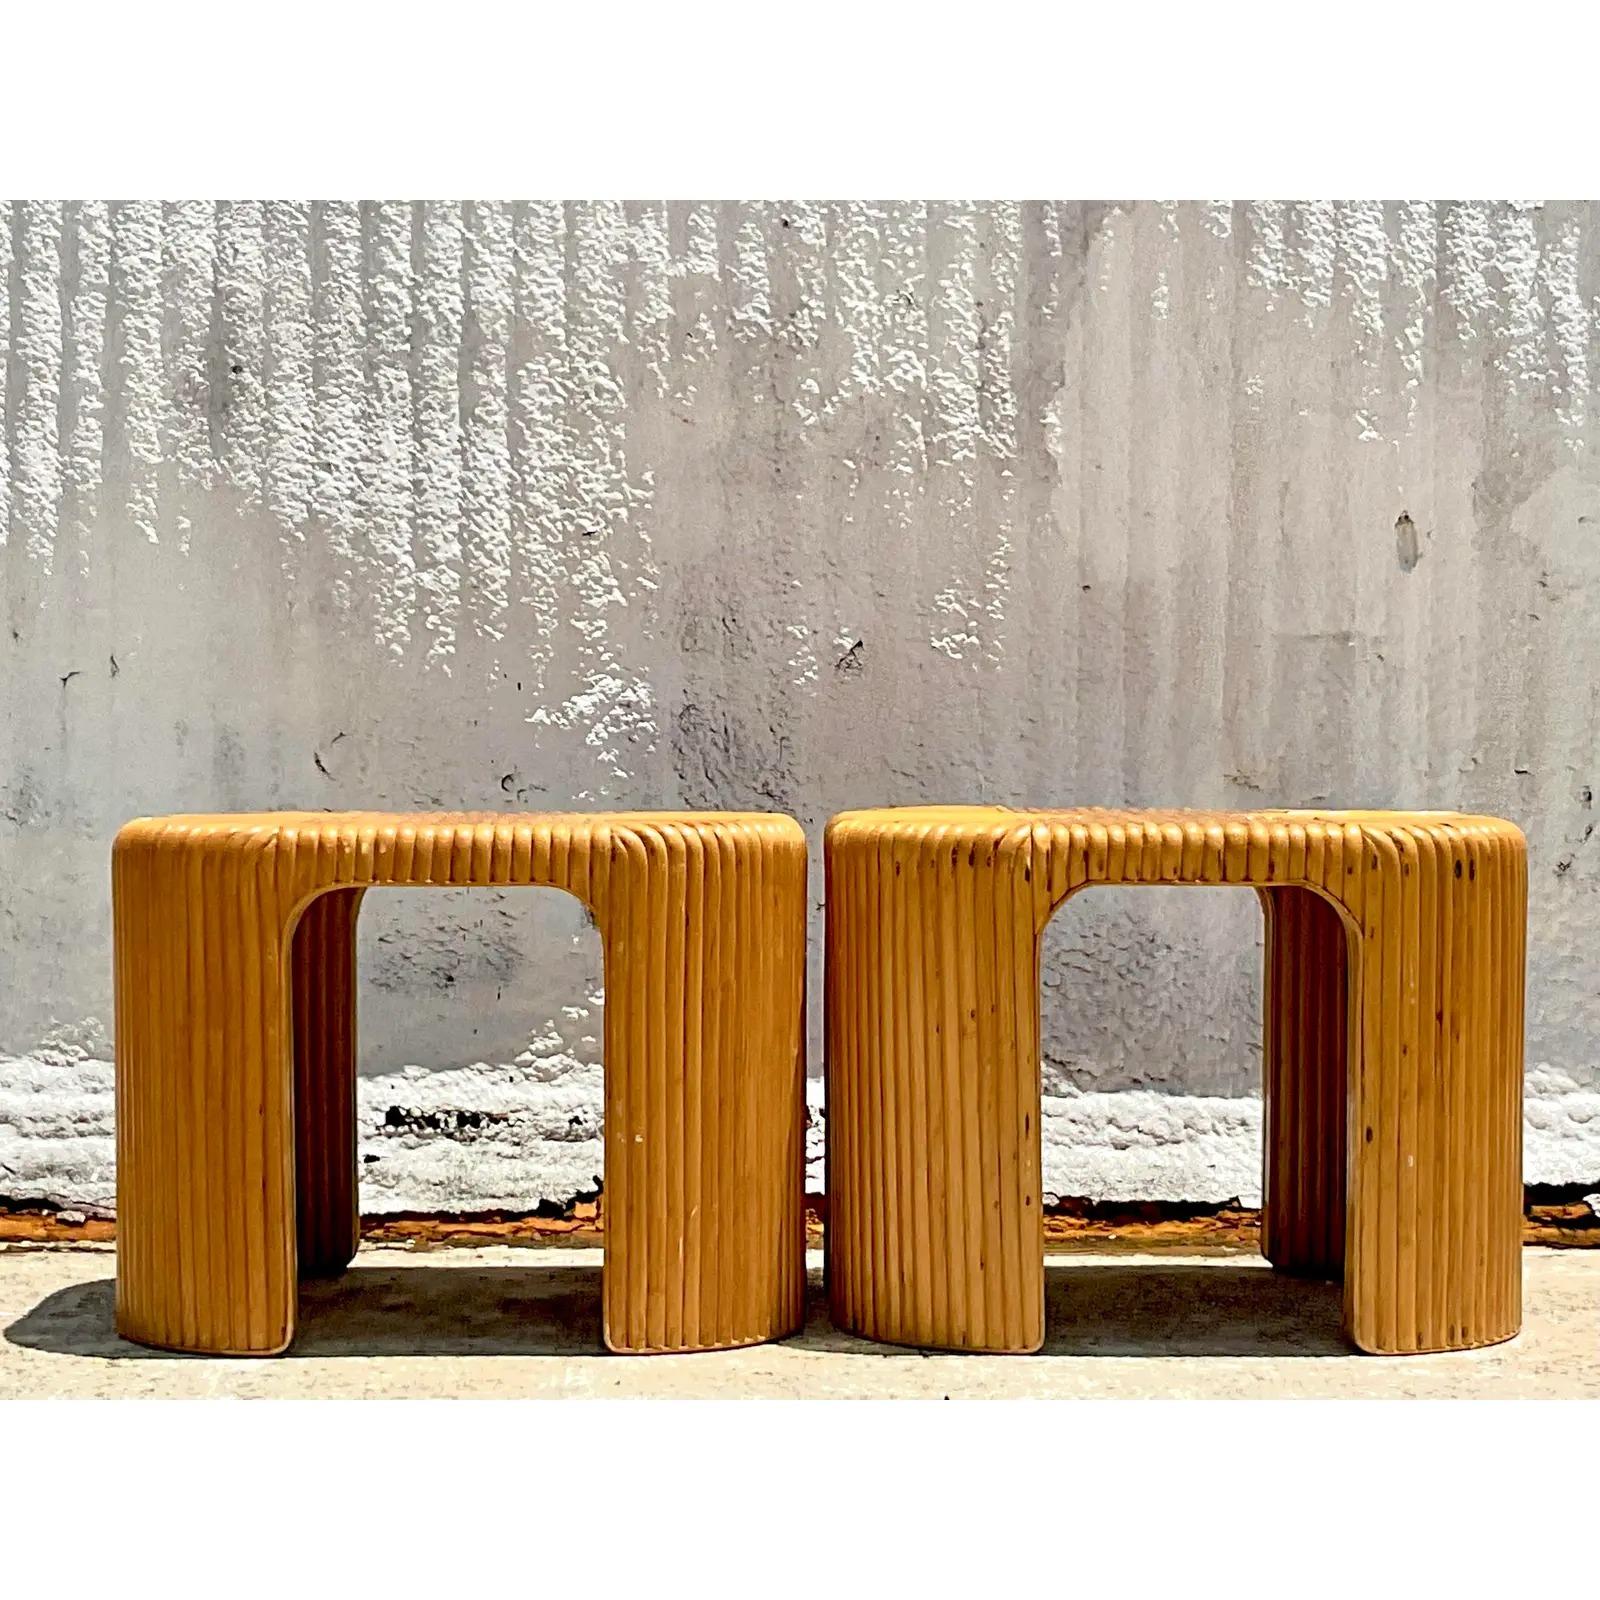 A fantastic pair of vintage Coastal side tables. A fabulous thick pretzel rattan in a chic waterfall design. Acquired from a Palm Beach estate.